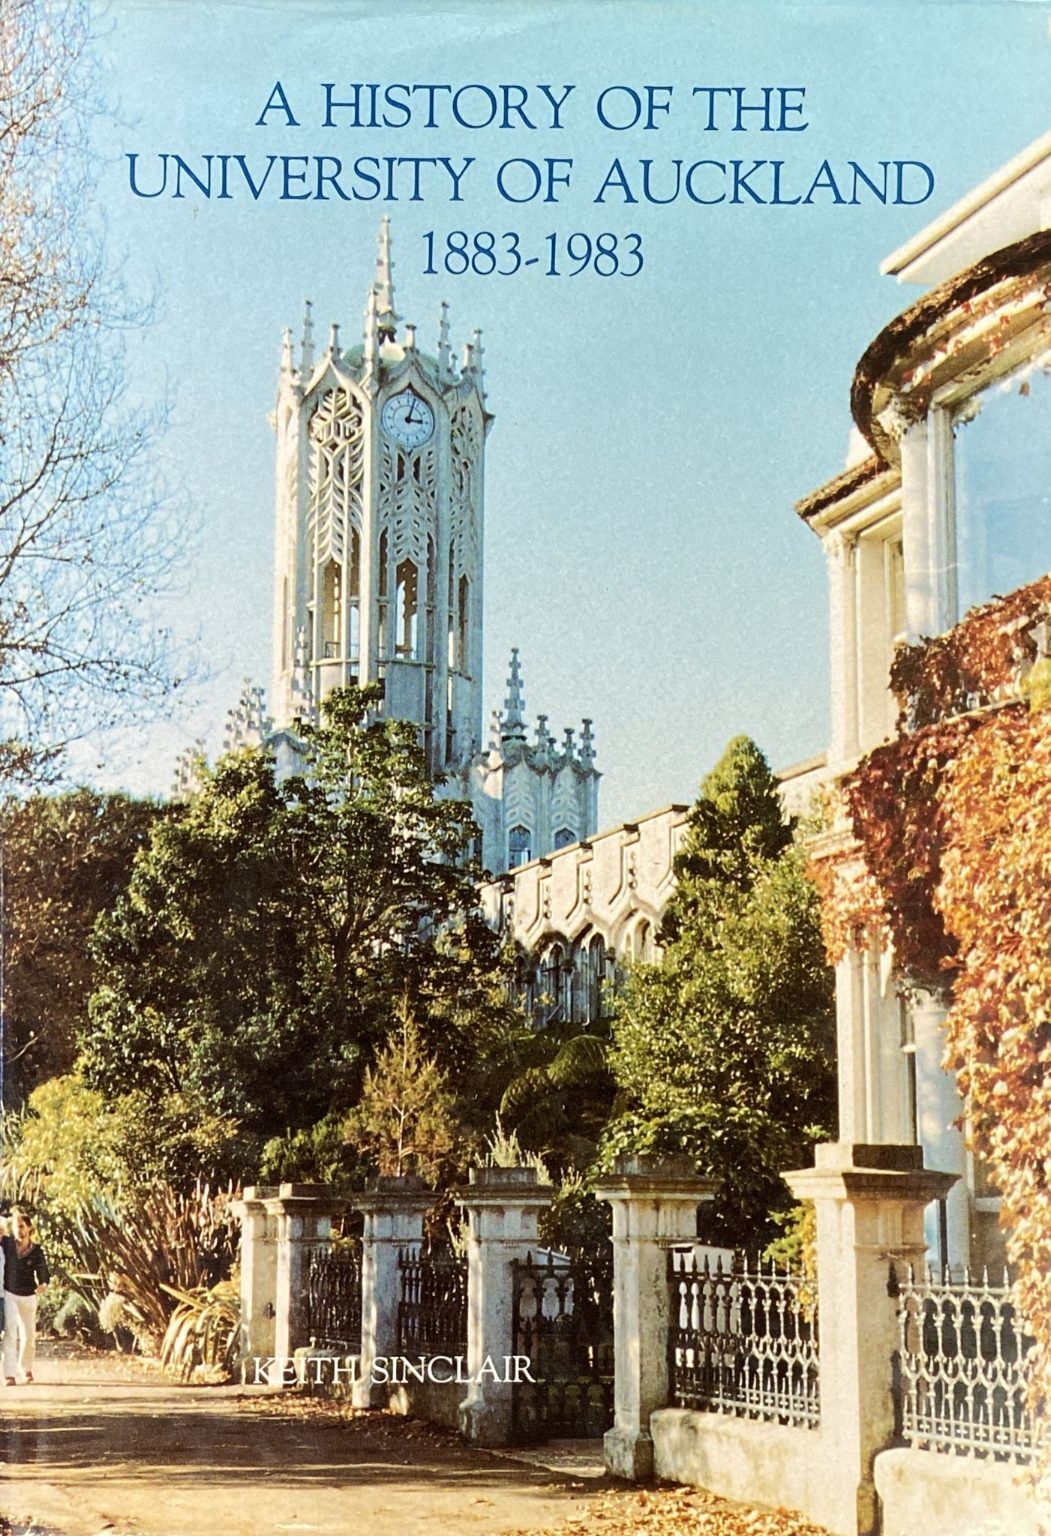 A HISTORY OF THE UNIVERSITY OF AUCKLAND 1883-1983